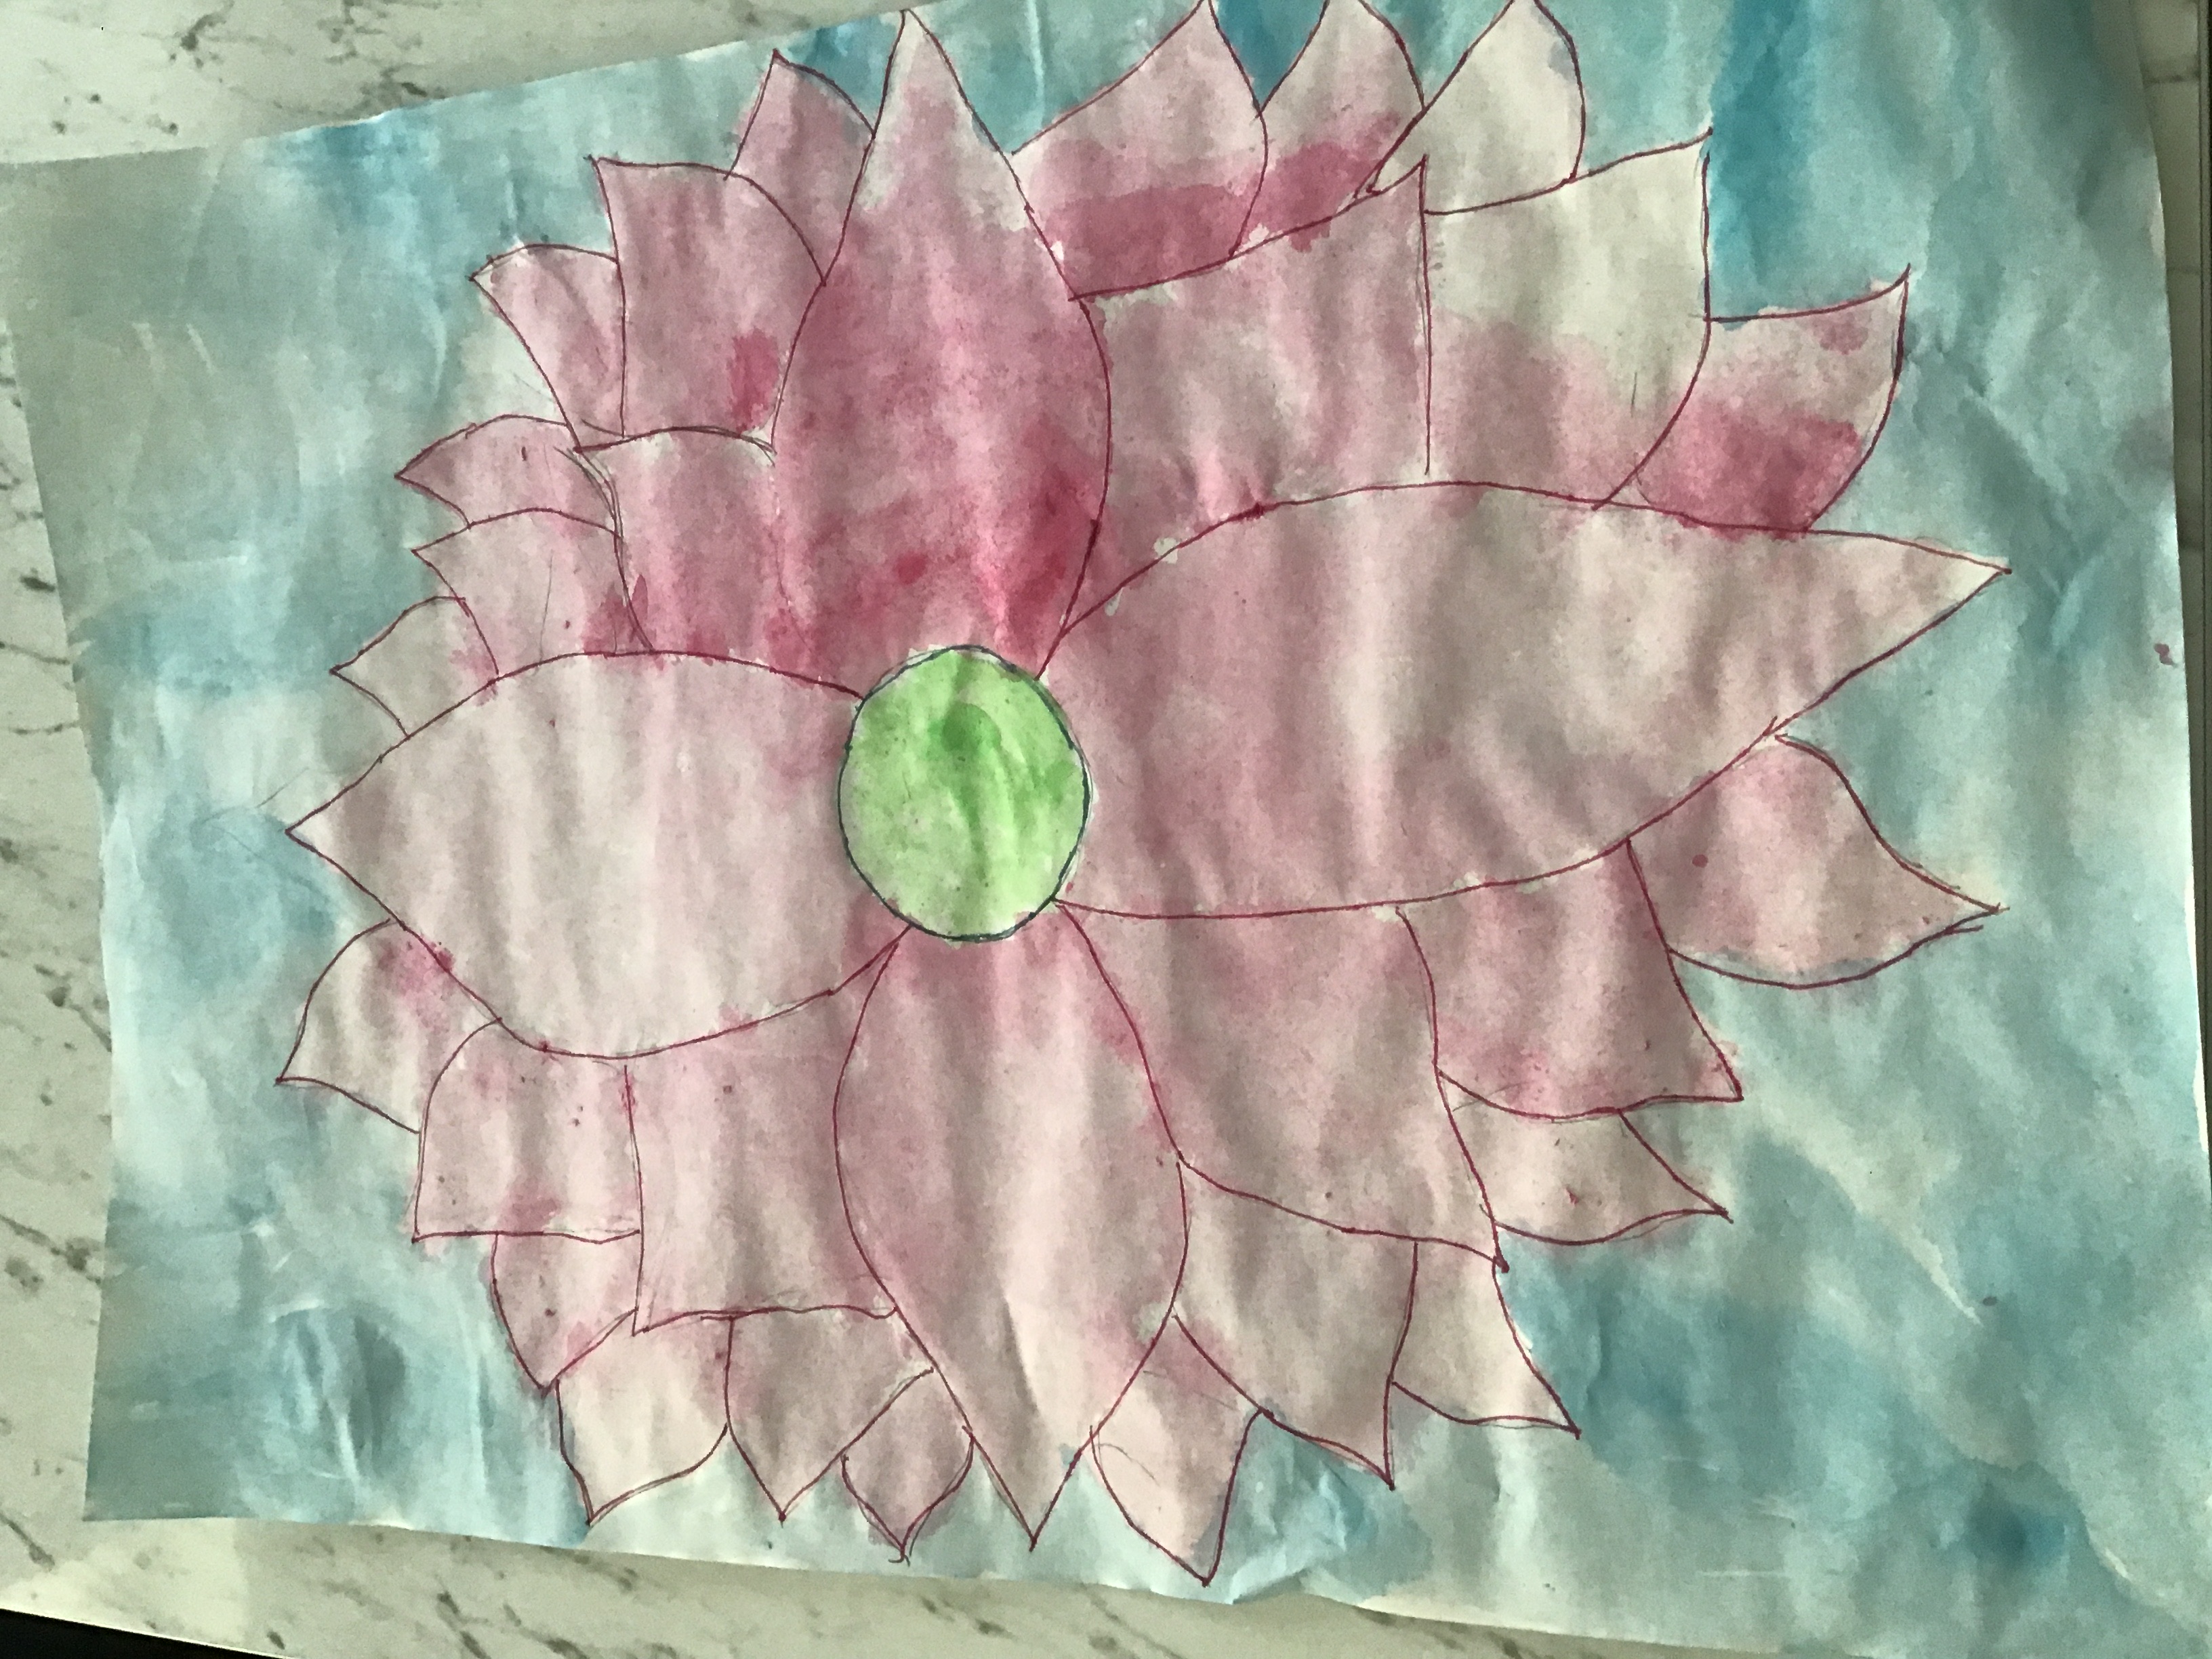 'The calming flower' by Erin (10) from Dublin